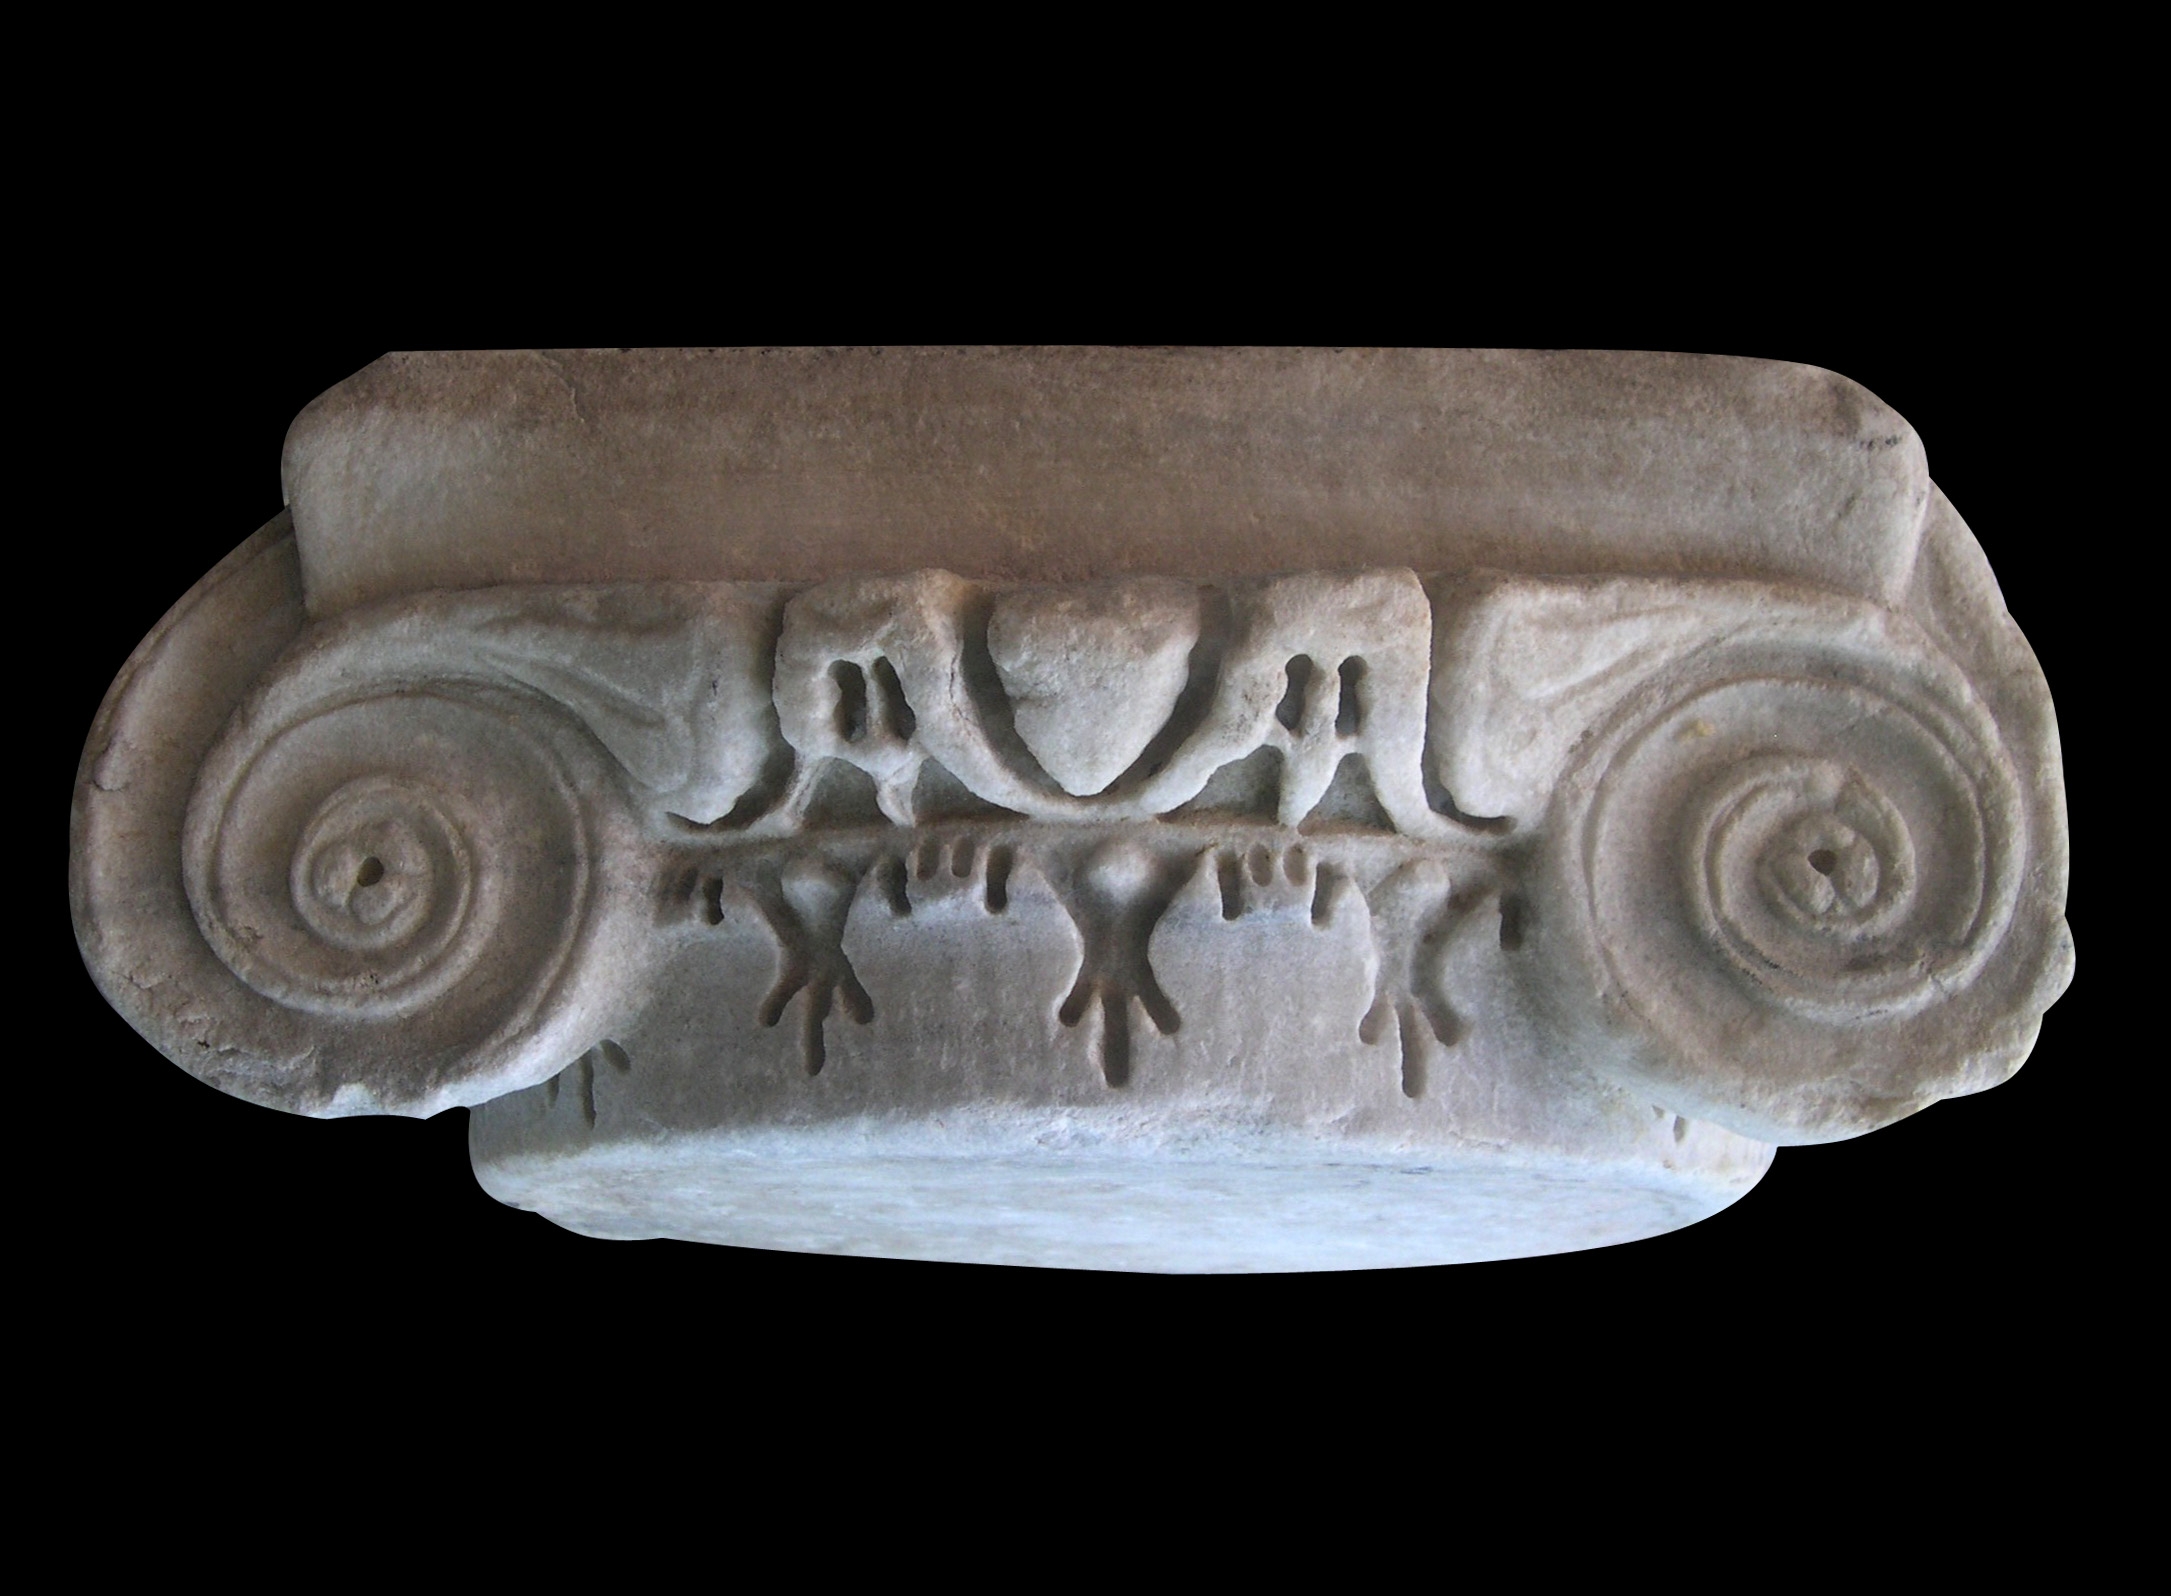 Opera di Ionic capital with neck of acanthus-like leaves